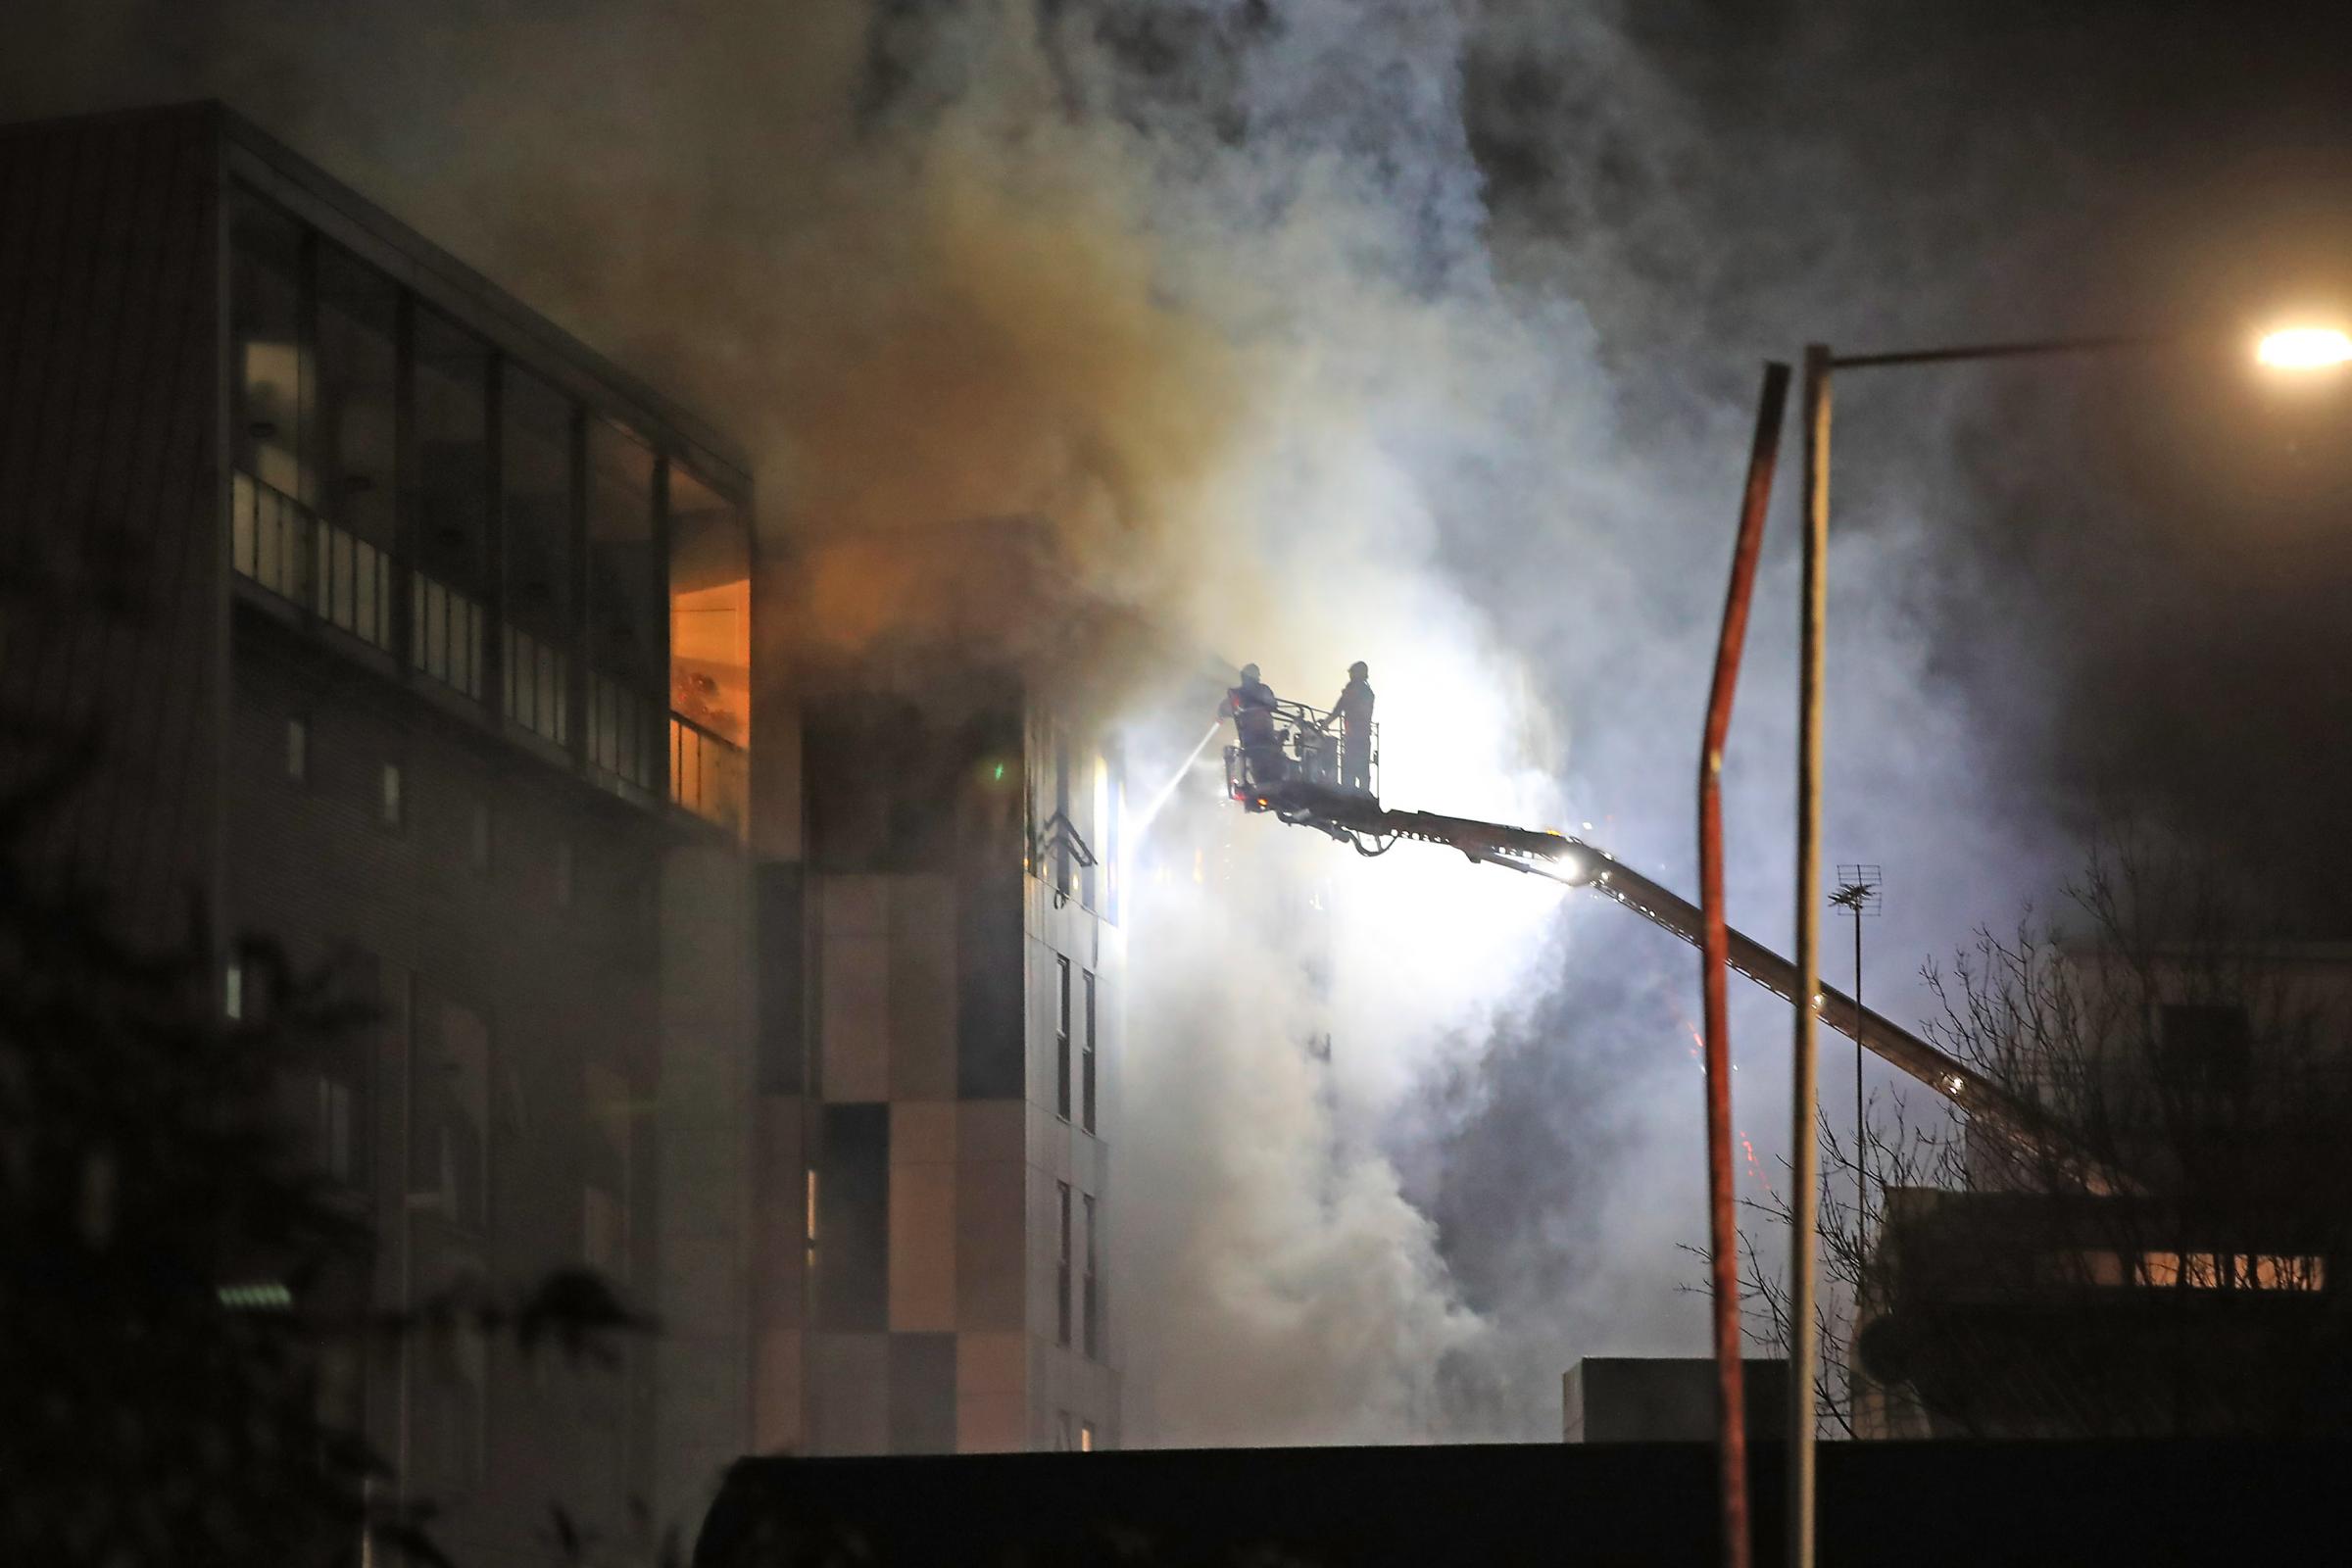 Student flats fire cladding in West Yorkshire high rises